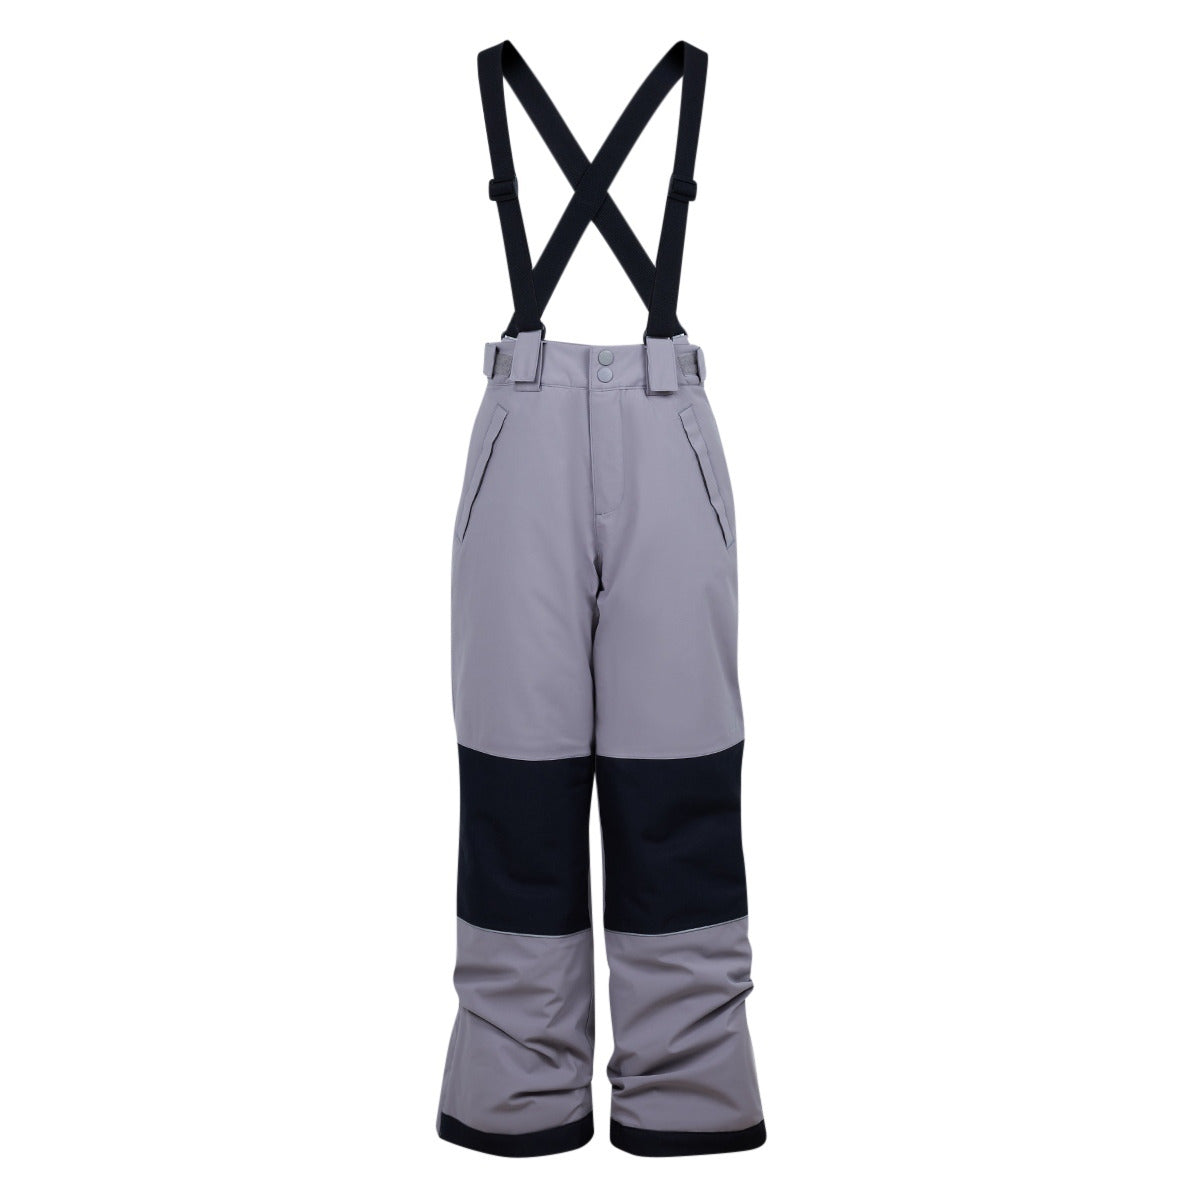 Ripzone Kid's Shuss 2.0 Jr. Insulated Pants with Suspenders